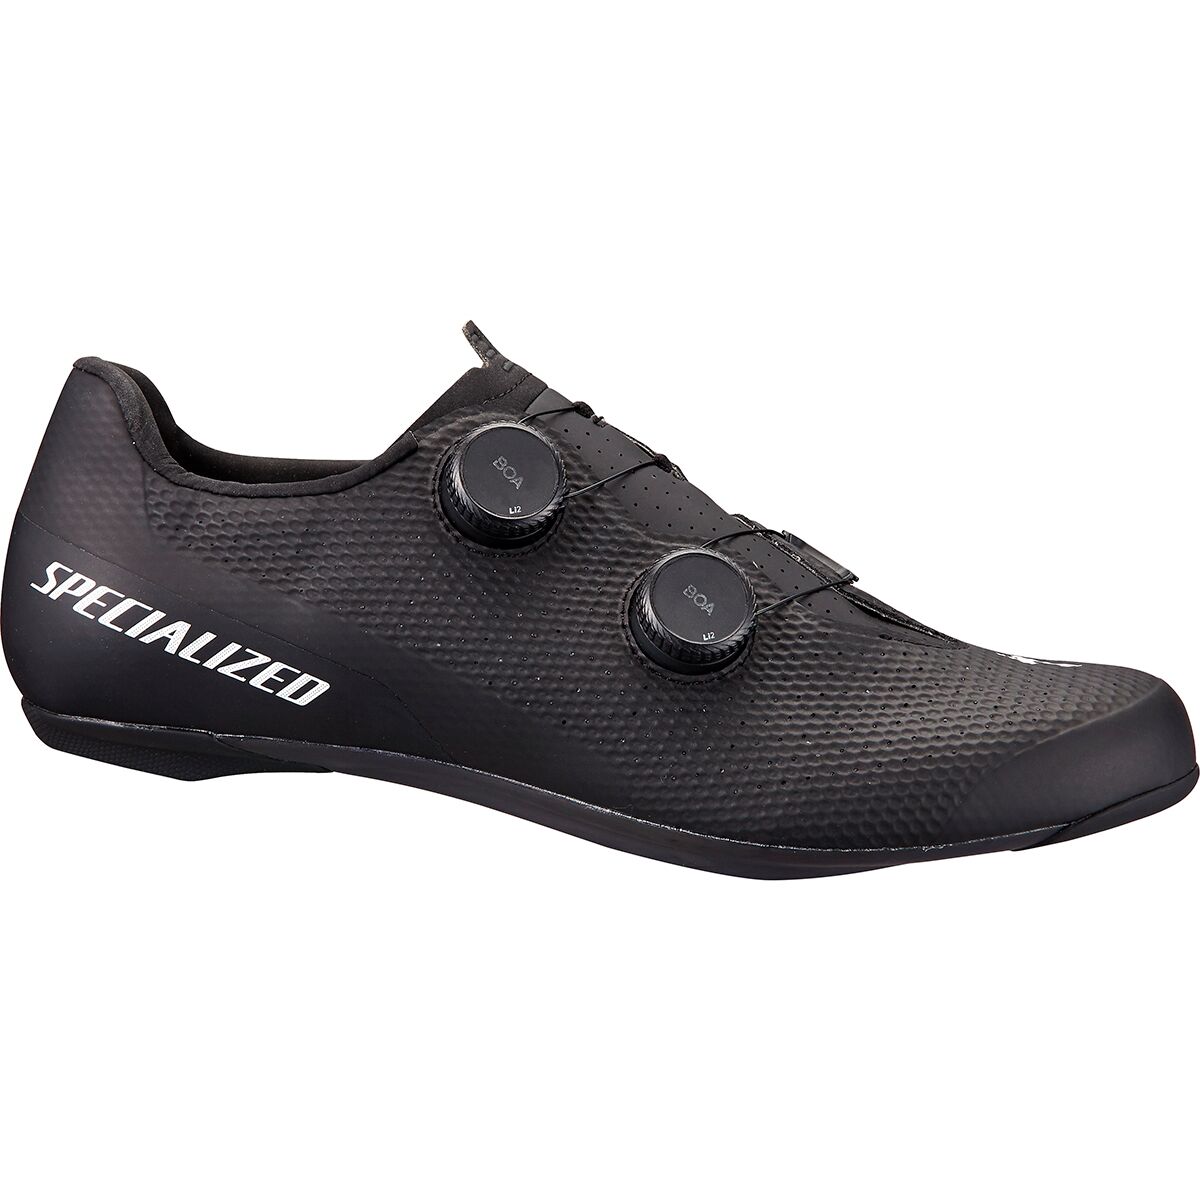 Specialized Torch 3.0 Cycling Shoe Black, 42.5 - Men's